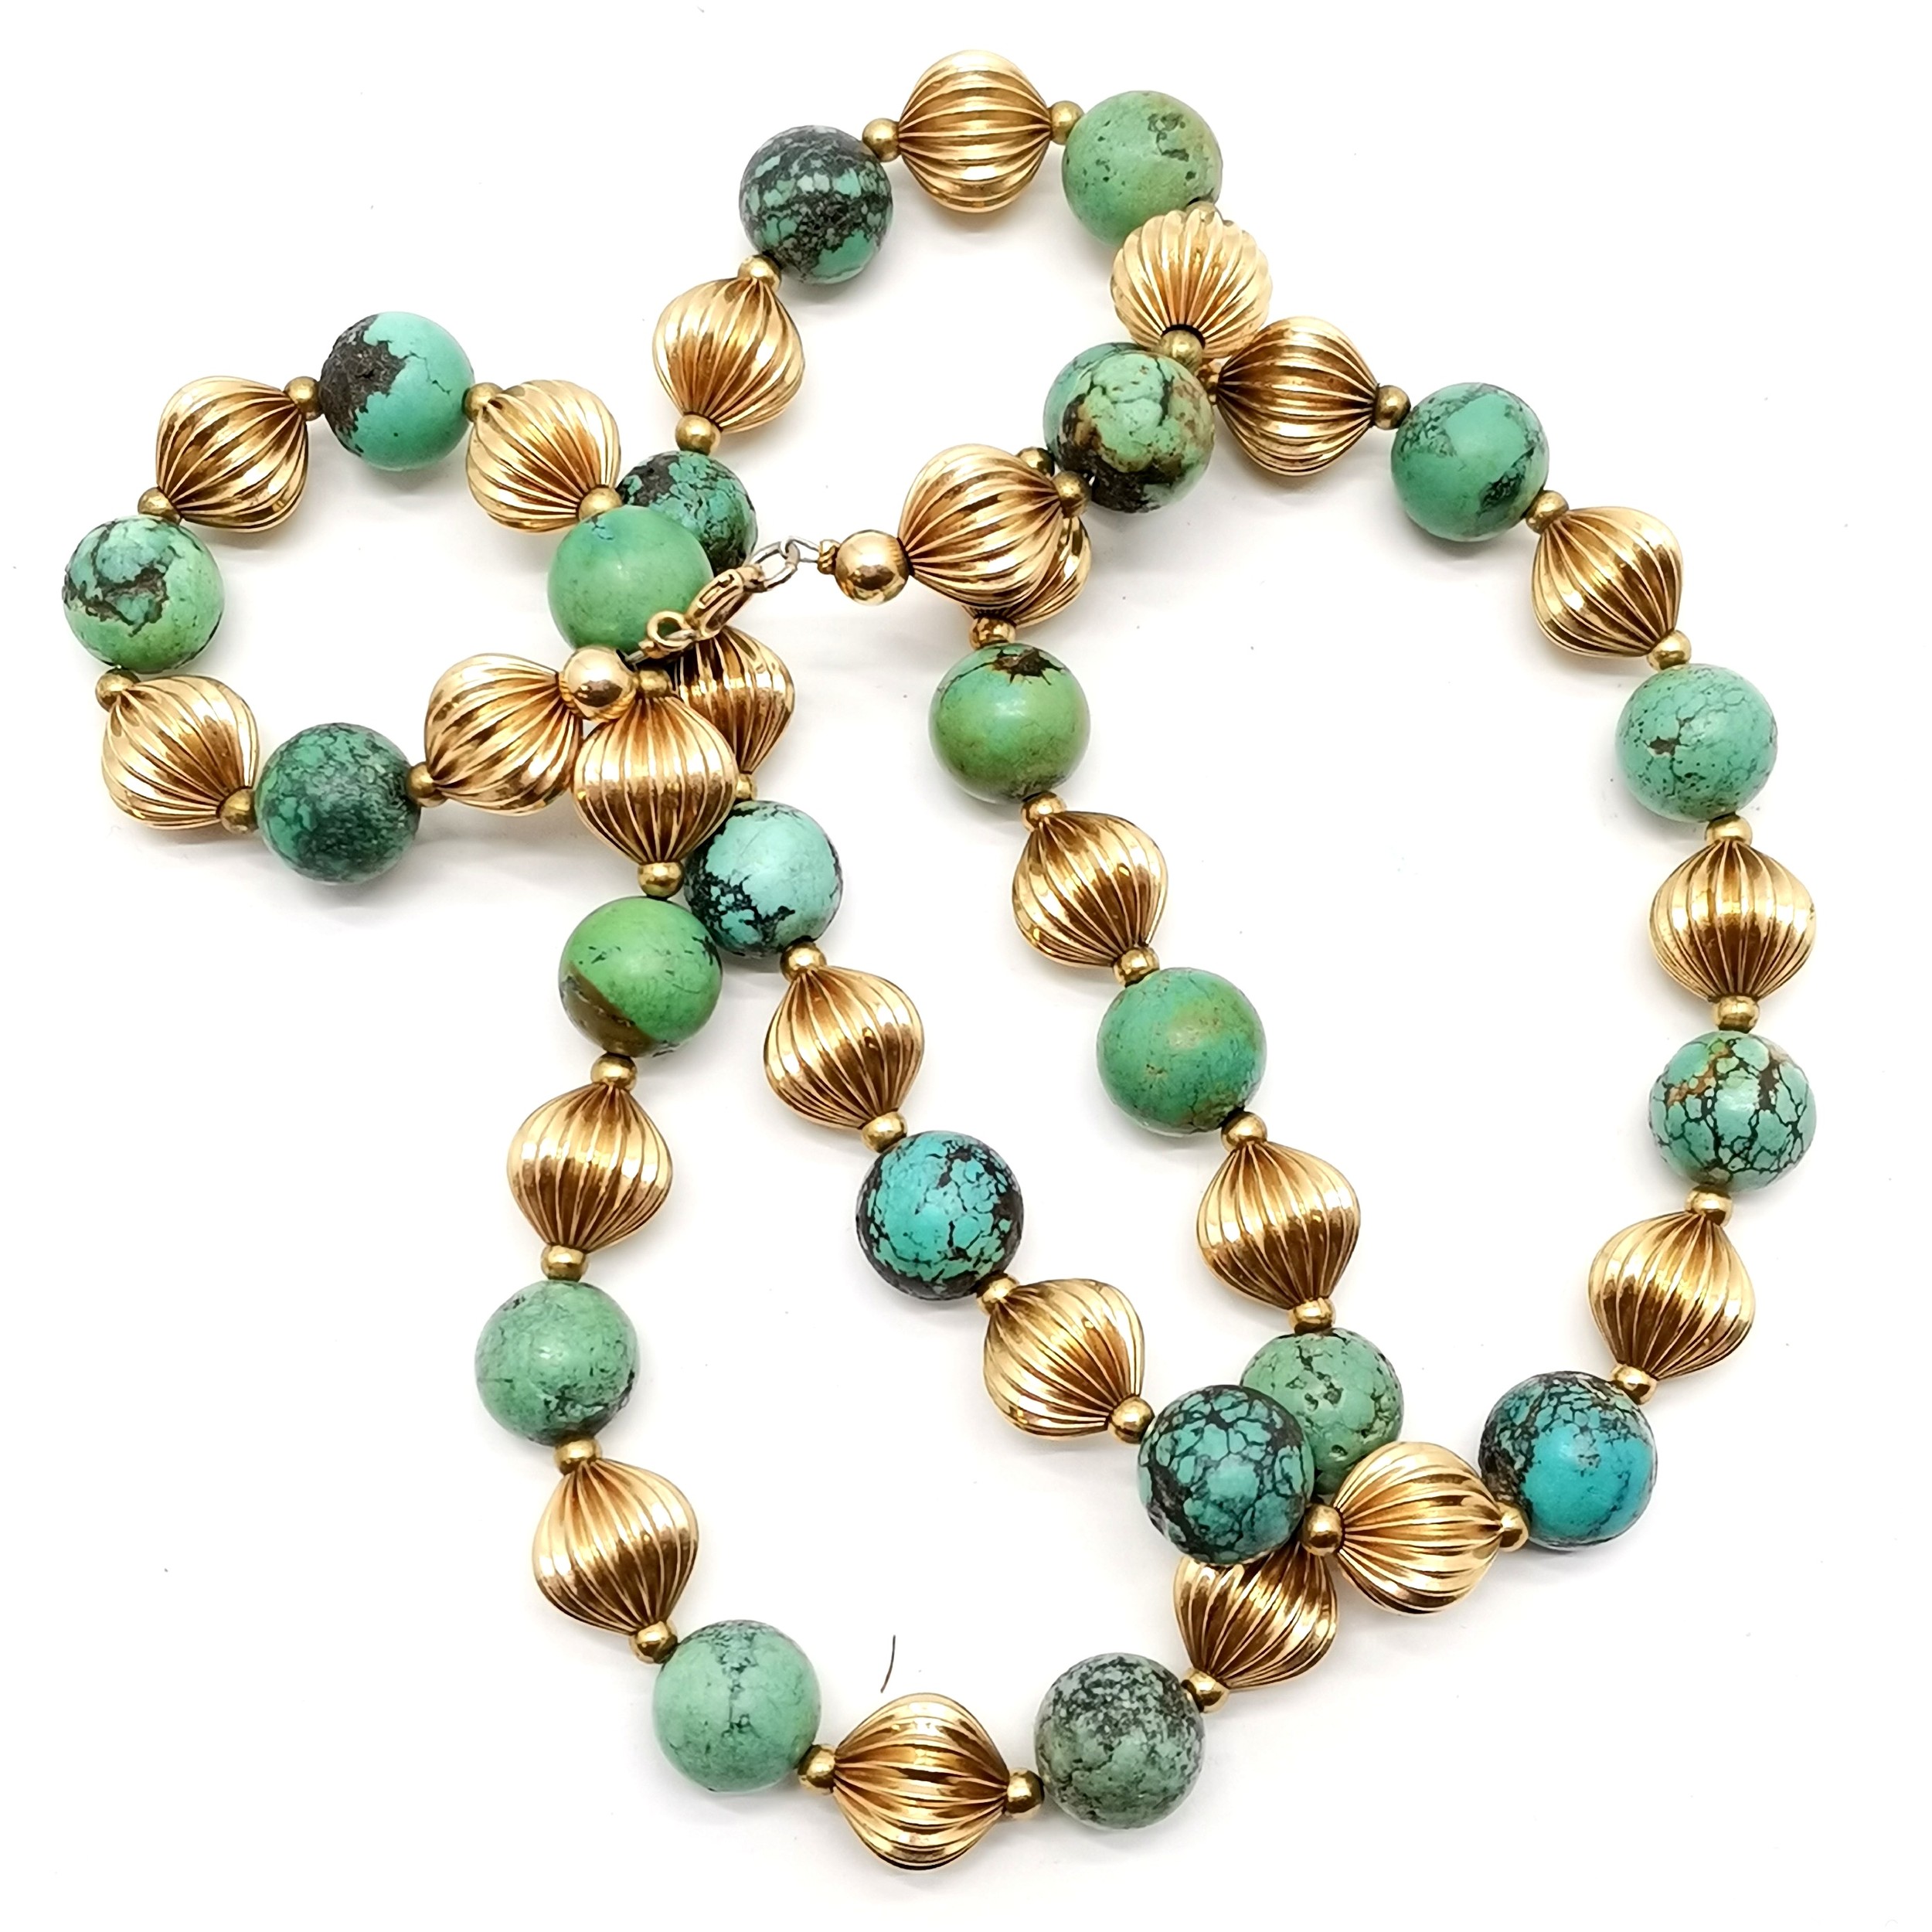 Turquiose / unmarked 14ct gold bead necklace with 14ct marked gold clasp - 72cm & total weight 119g - Image 5 of 5